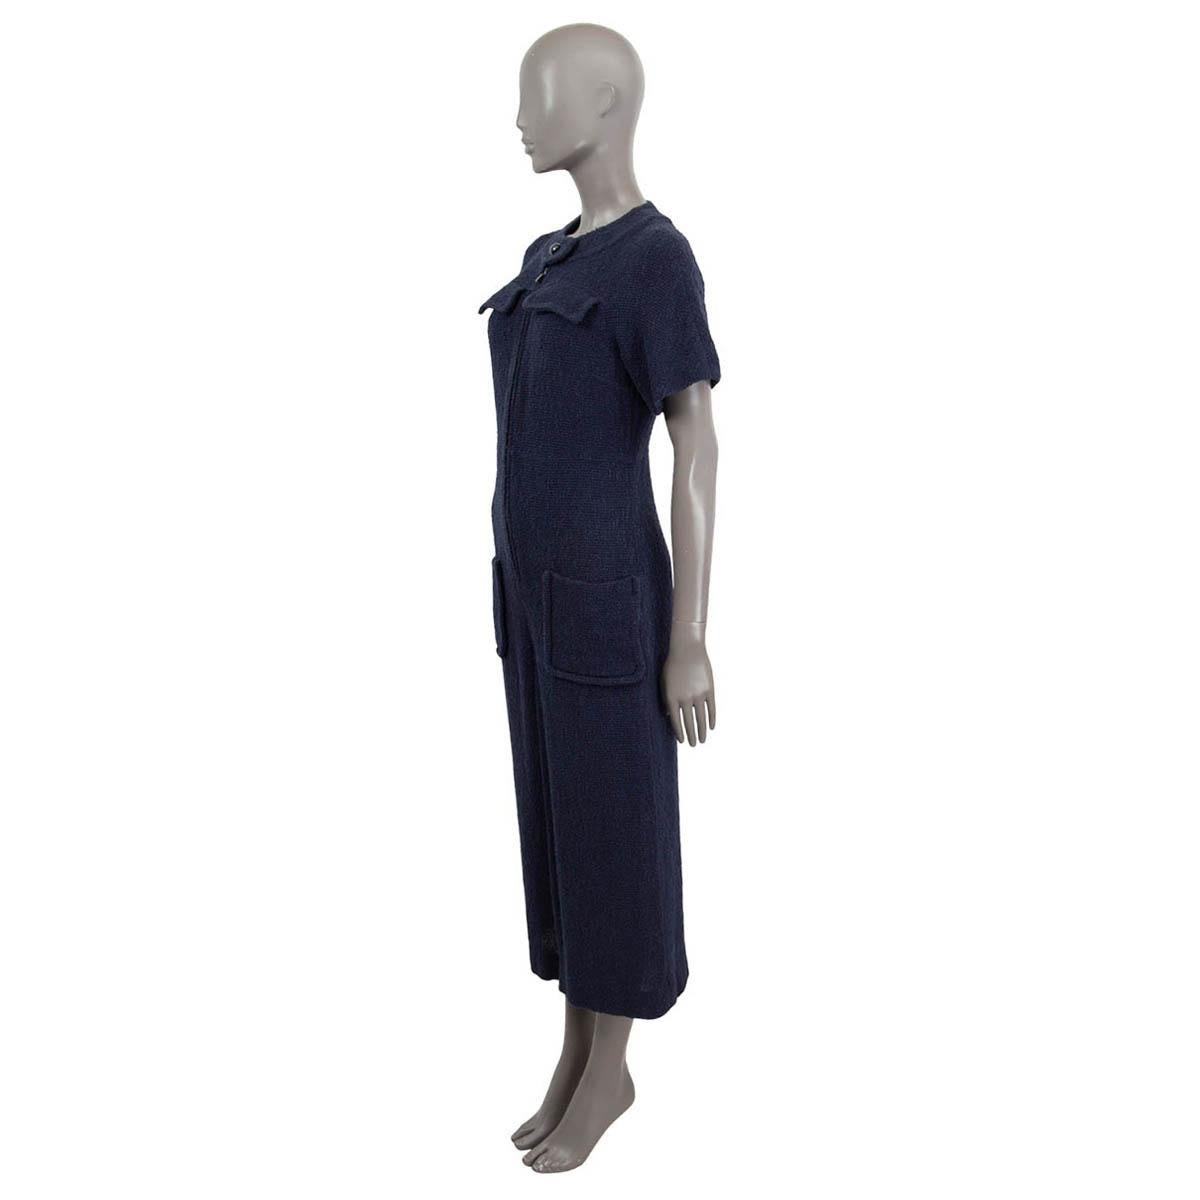 100% authentic Chanel 2016 short-sleeve wide-leg drop-crotch jumpsuit in navy blue cotton (90%) and nylon (10%) tweed with a navy blue silk (100%) lining. The design has a round collar with button detail and opens with a zipper at front. Two patch